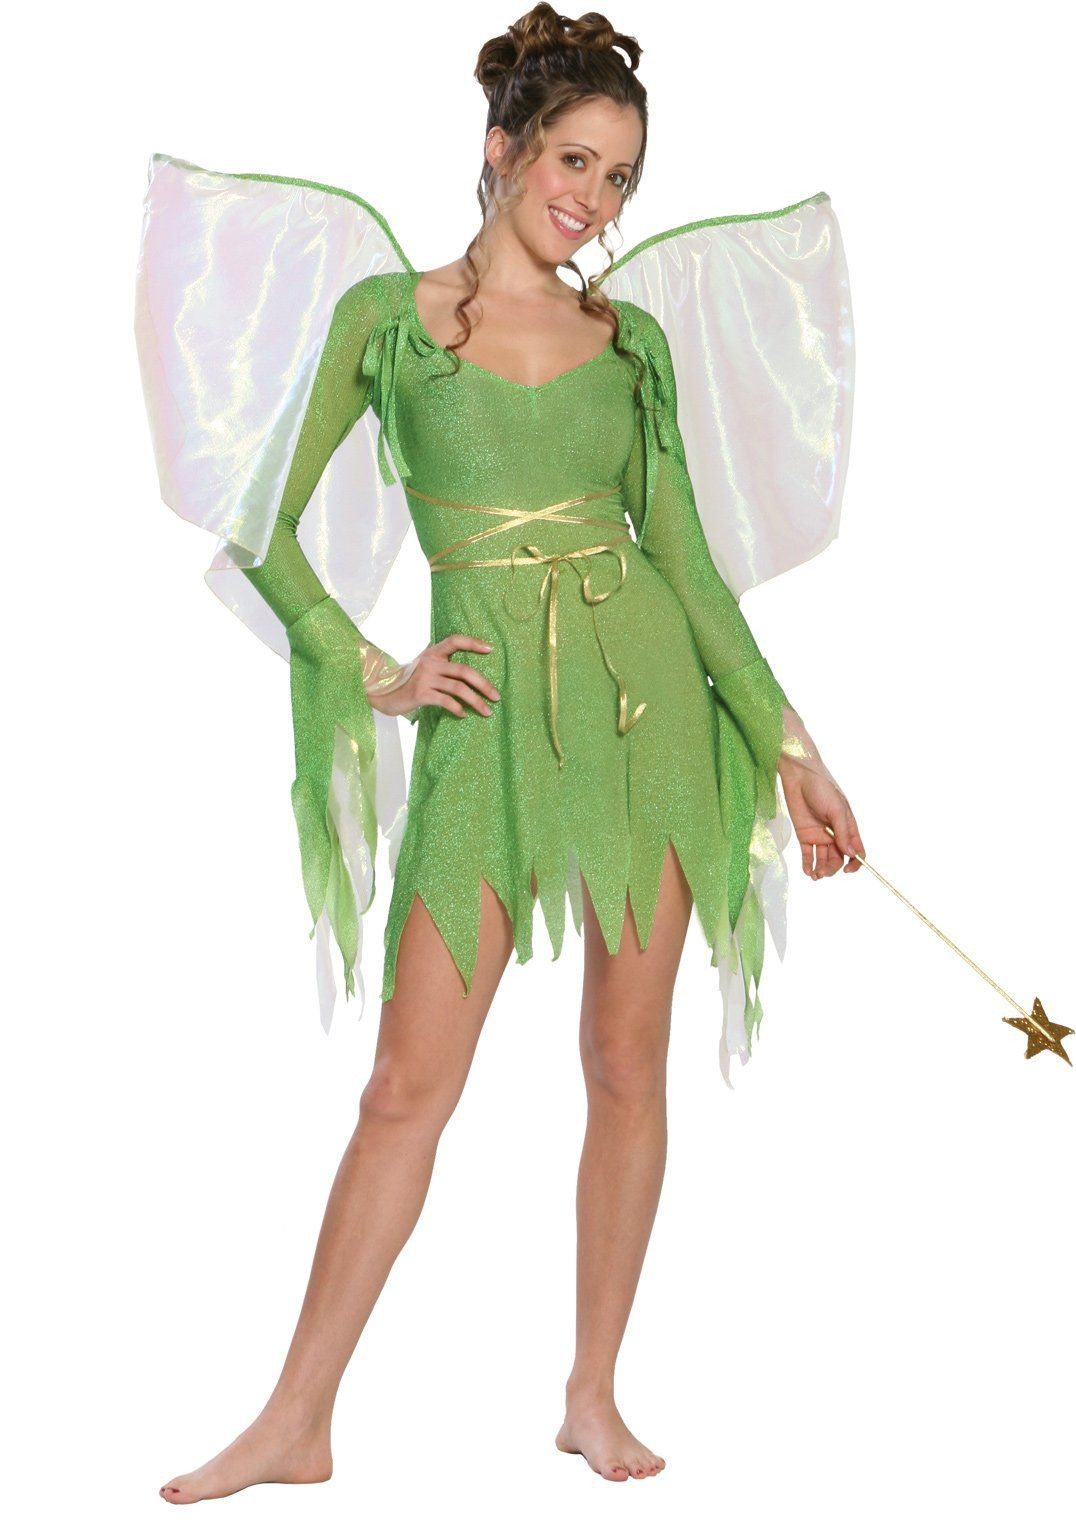 DIY Adult Tinkerbell Costume
 Pin on costumes